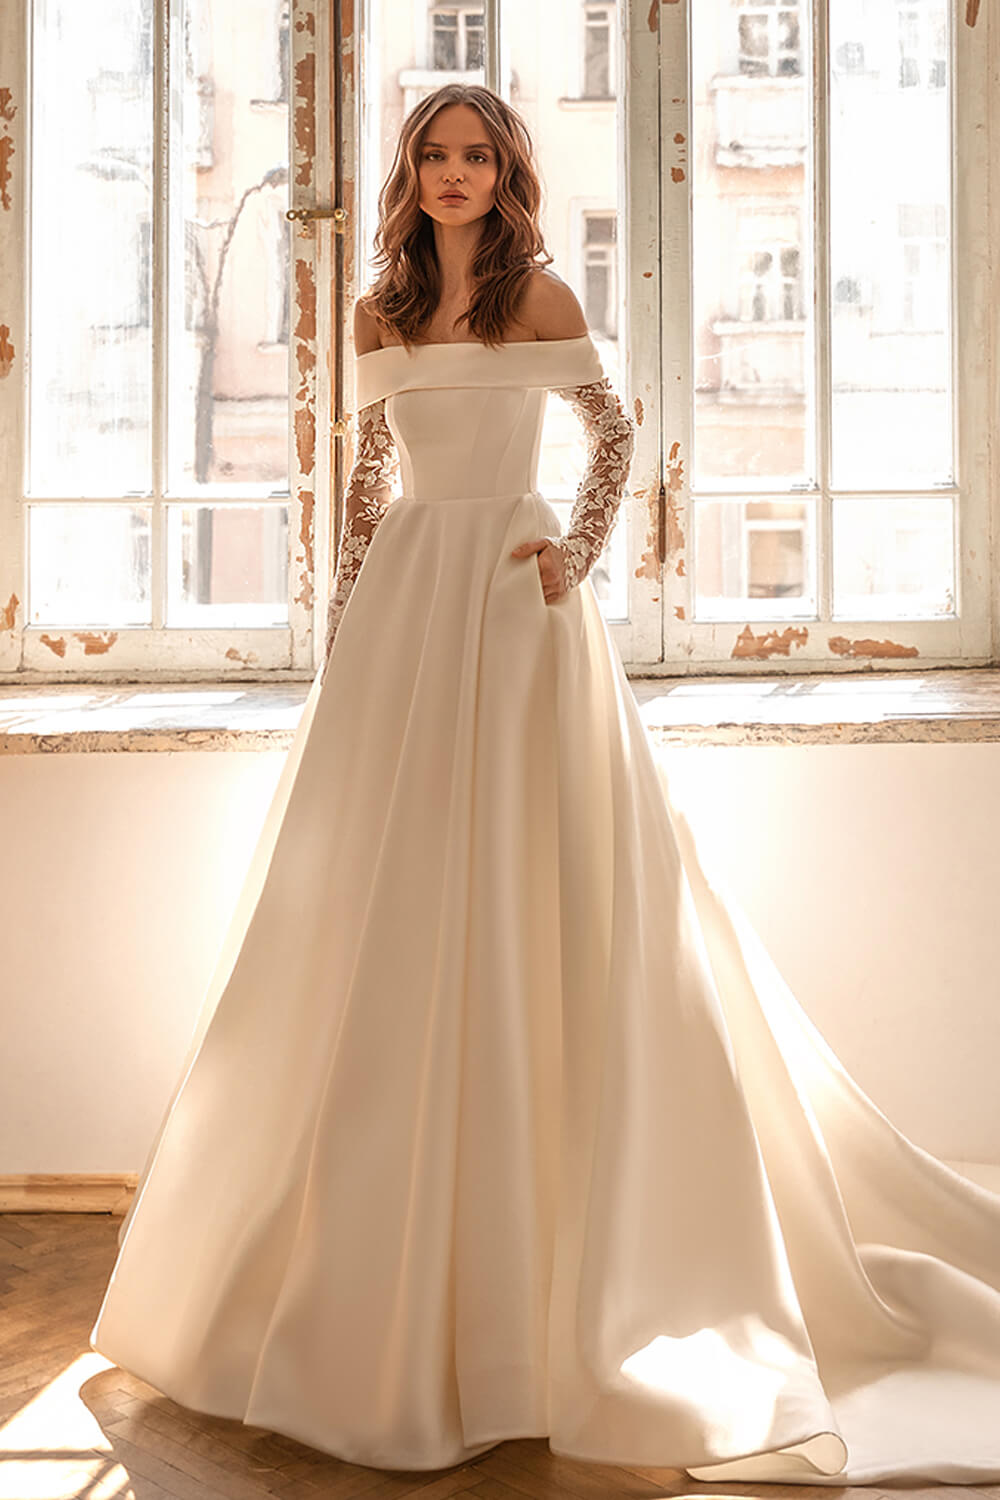 Five wedding dresses for women you'll admire! - Esposa Group